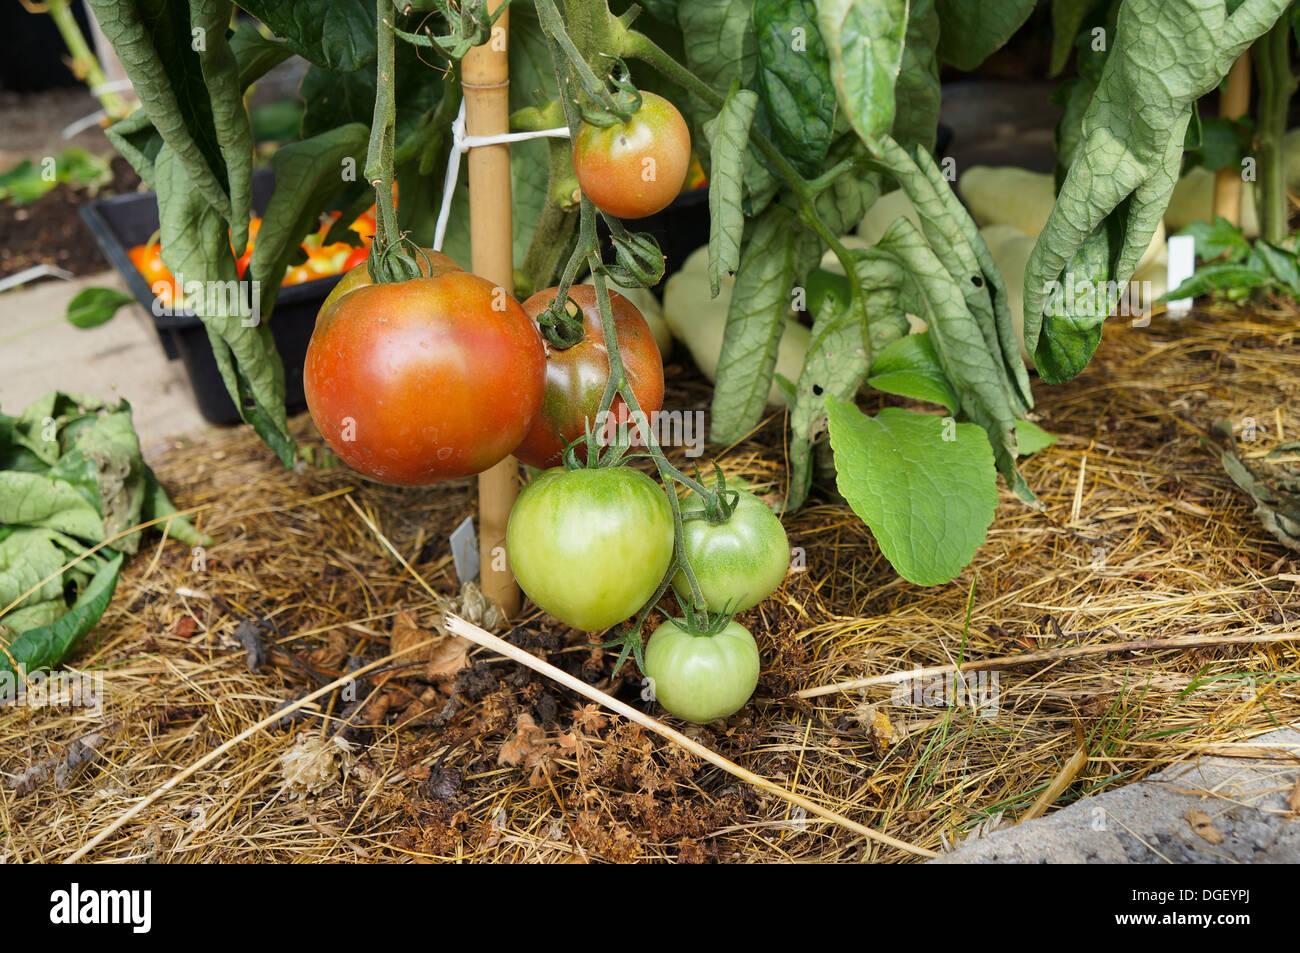 Tomato plant with red and green tomatos Stock Photo